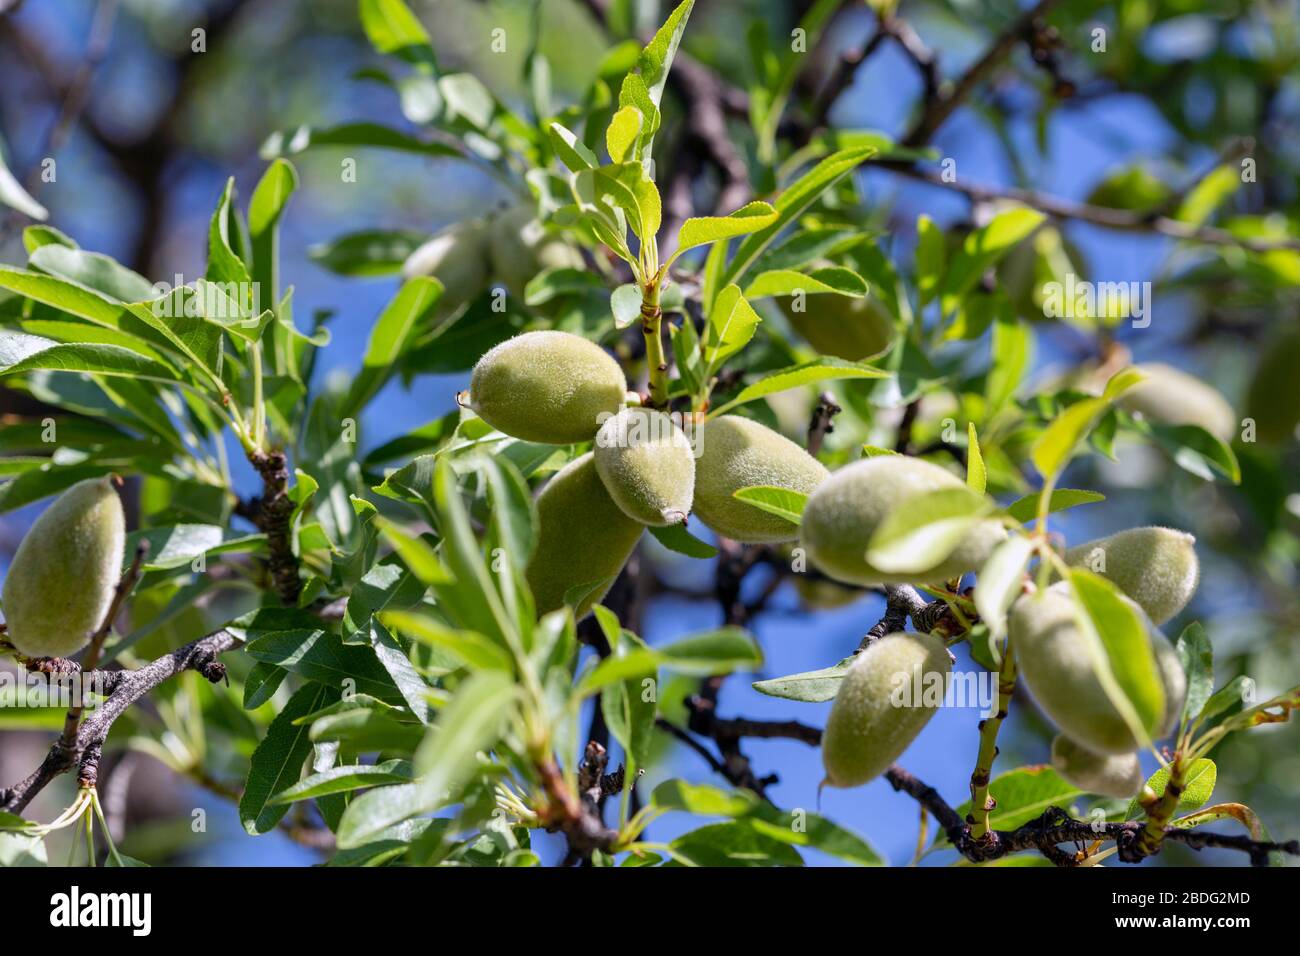 Almonds (Prunus dulcis) in their hulls, or husks, on a tree.  Southern Spain. Stock Photo